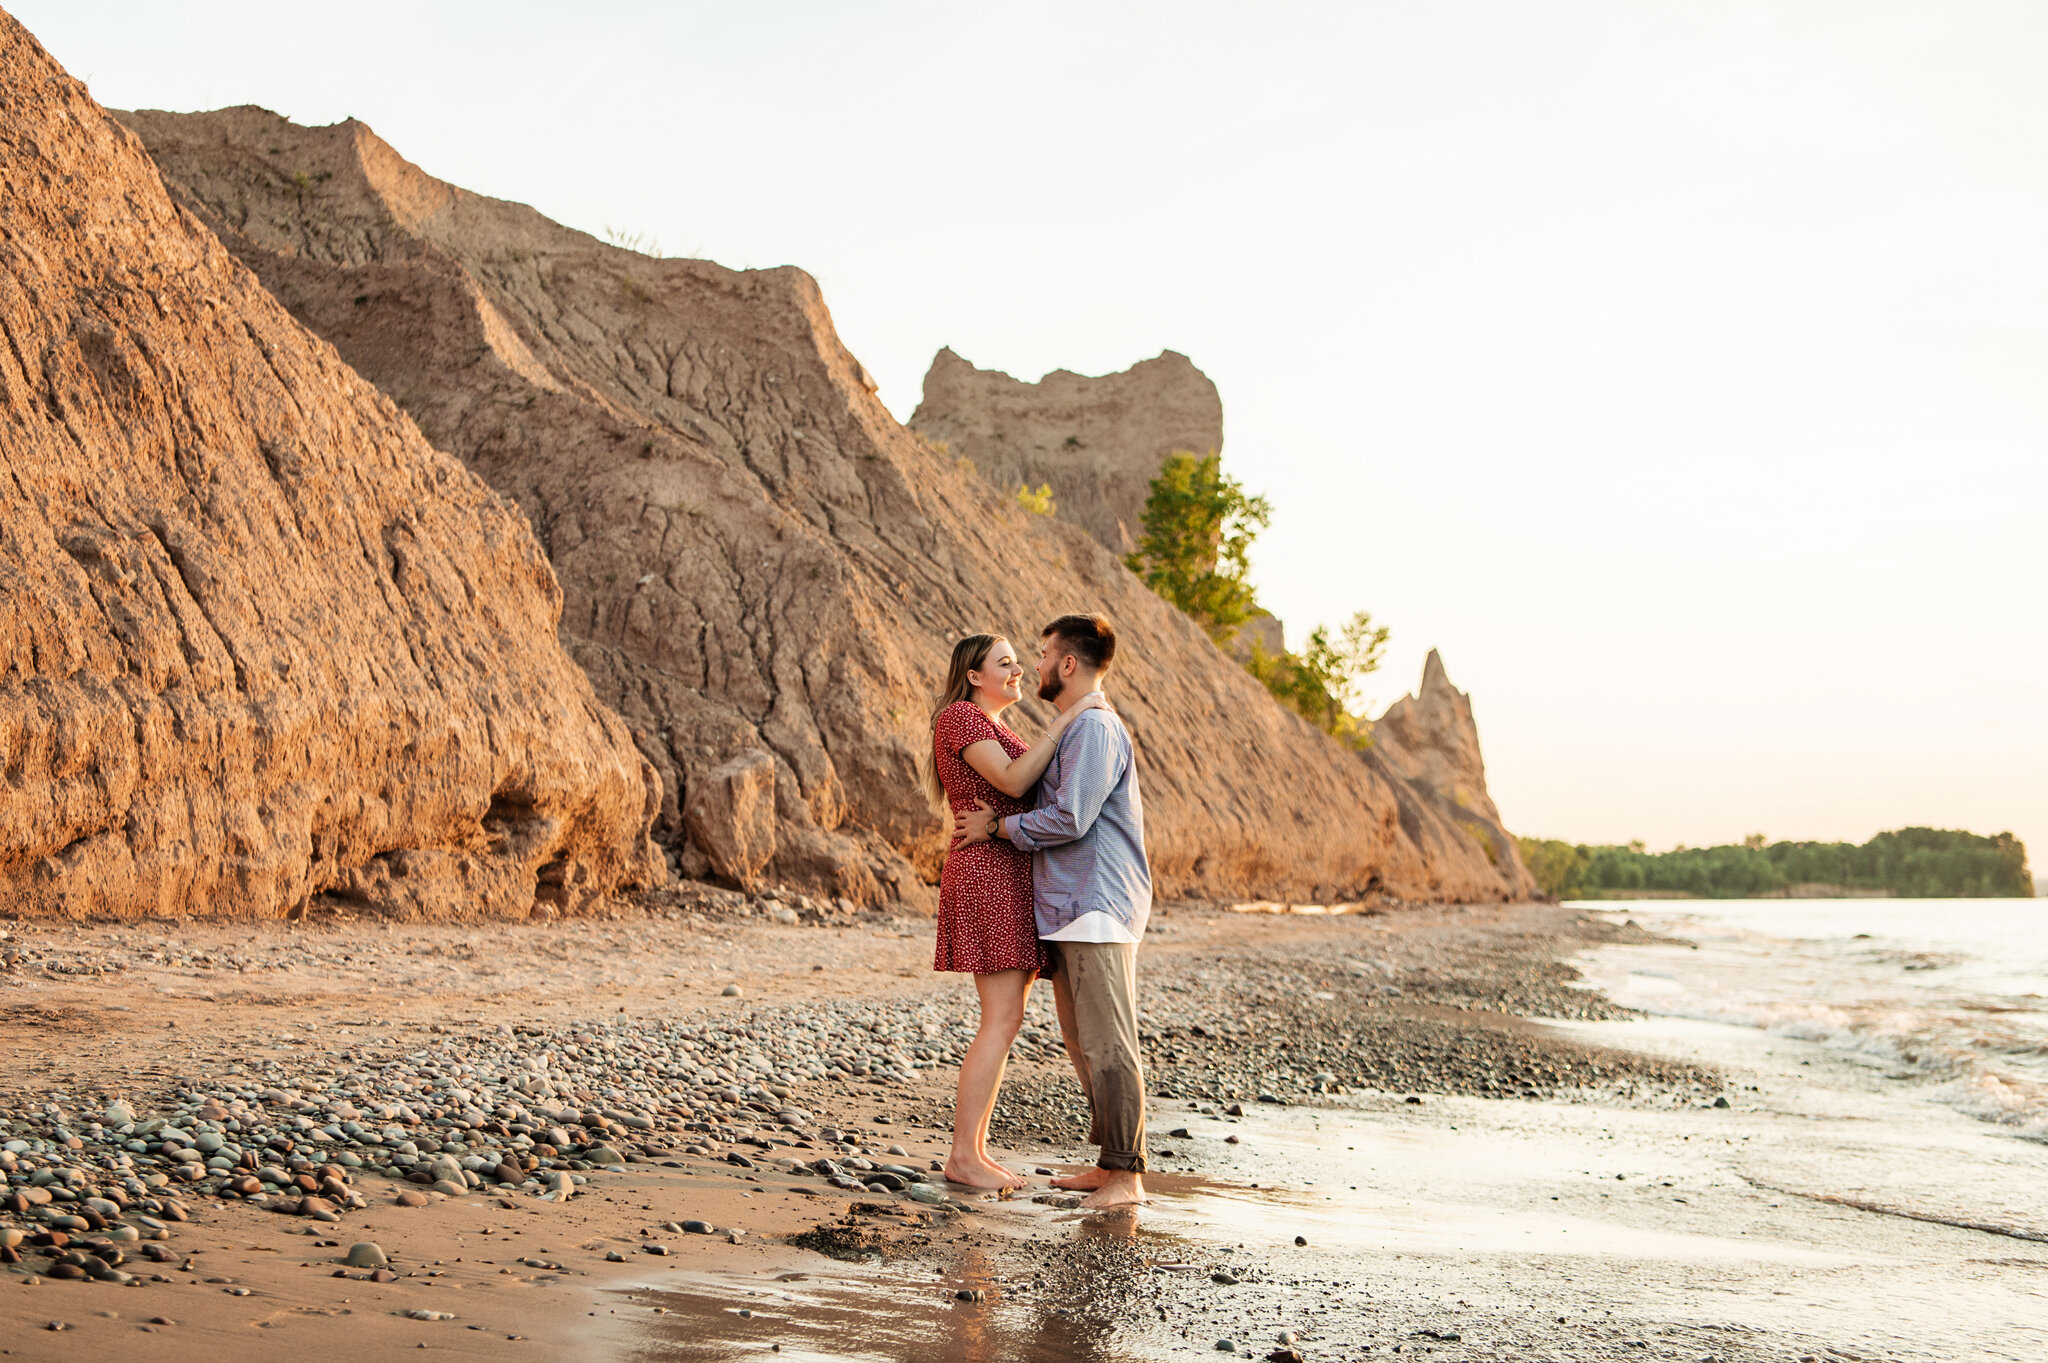 Chimney_Bluffs_State_Park_Rochester_Engagement_Session_JILL_STUDIO_Rochester_NY_Photographer_7105.jpg